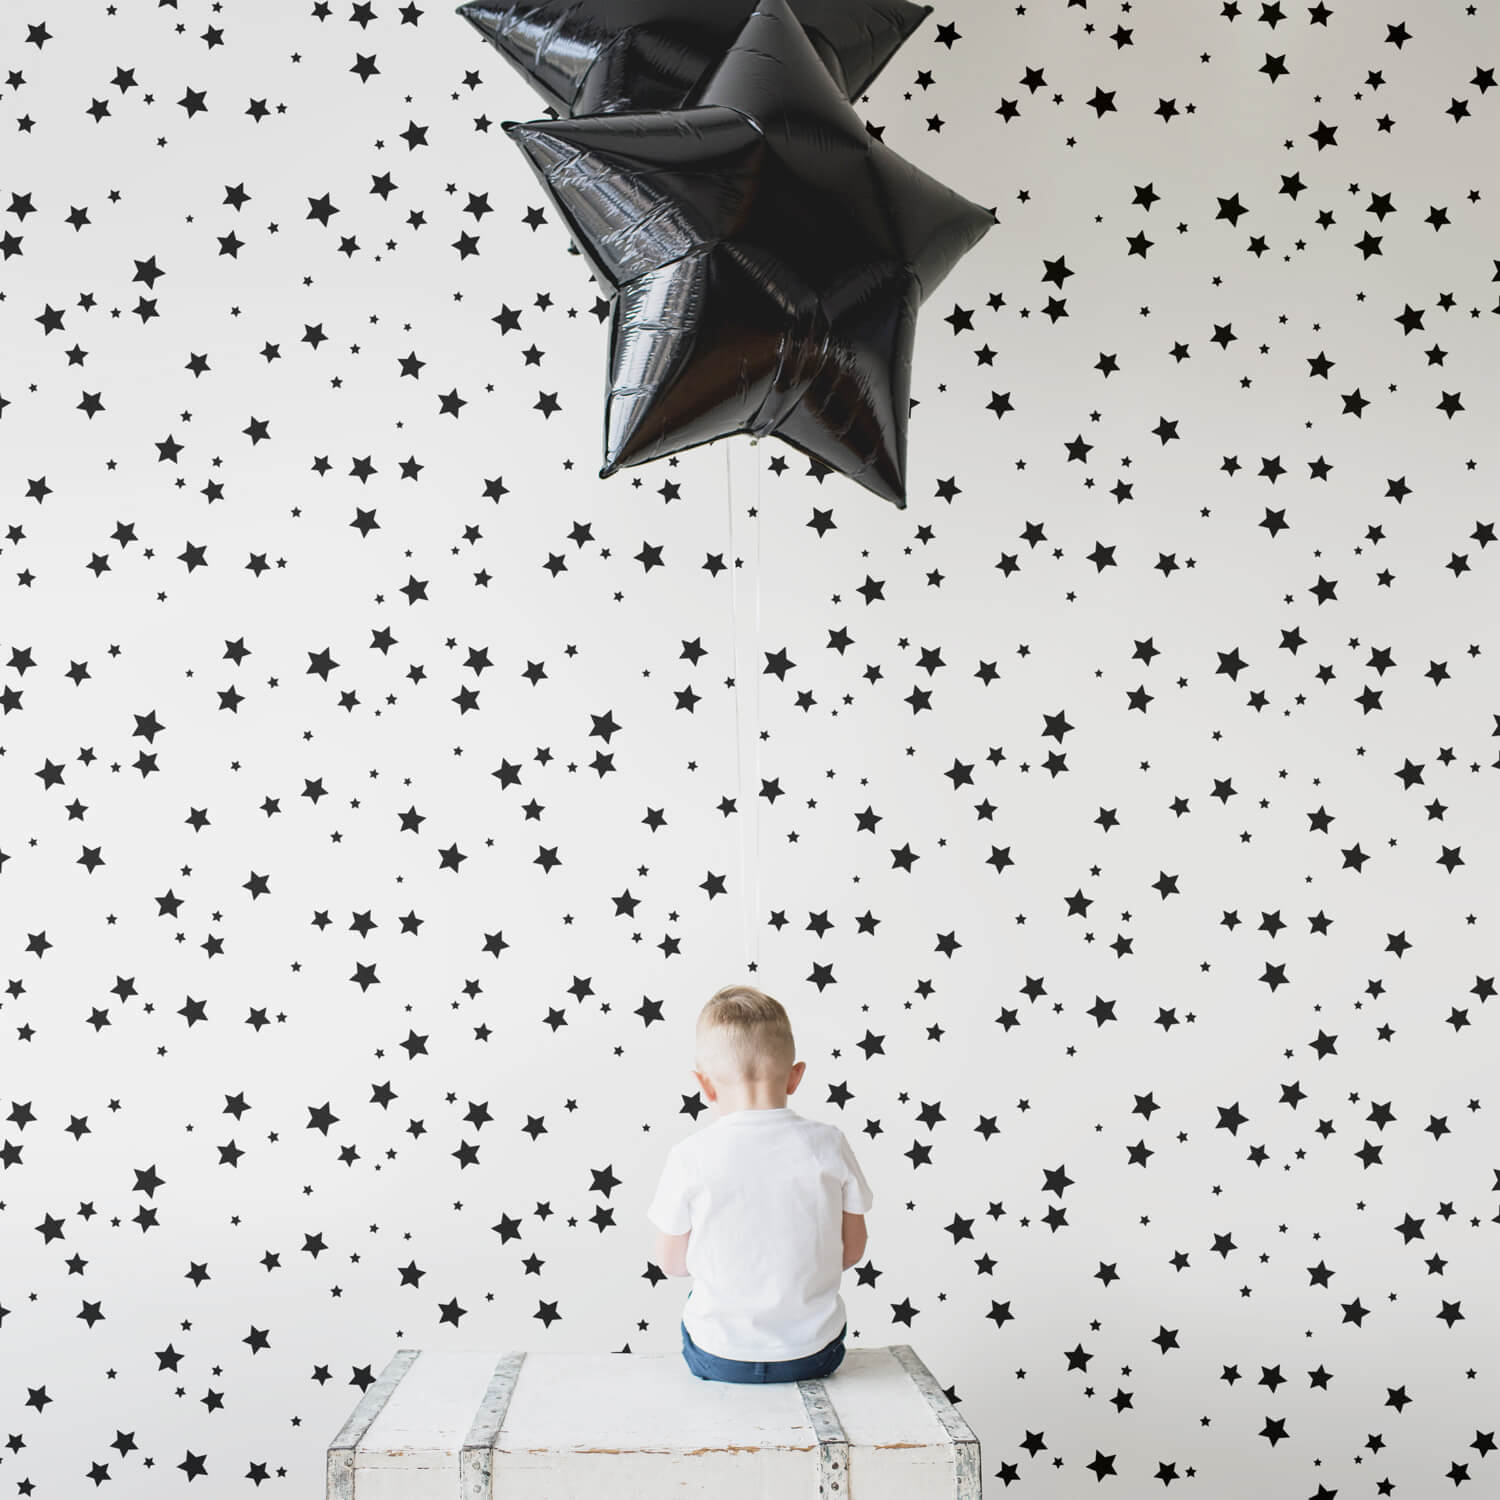 Stars Wall Stickers Star Wall Decals Removable Star Stickers Star